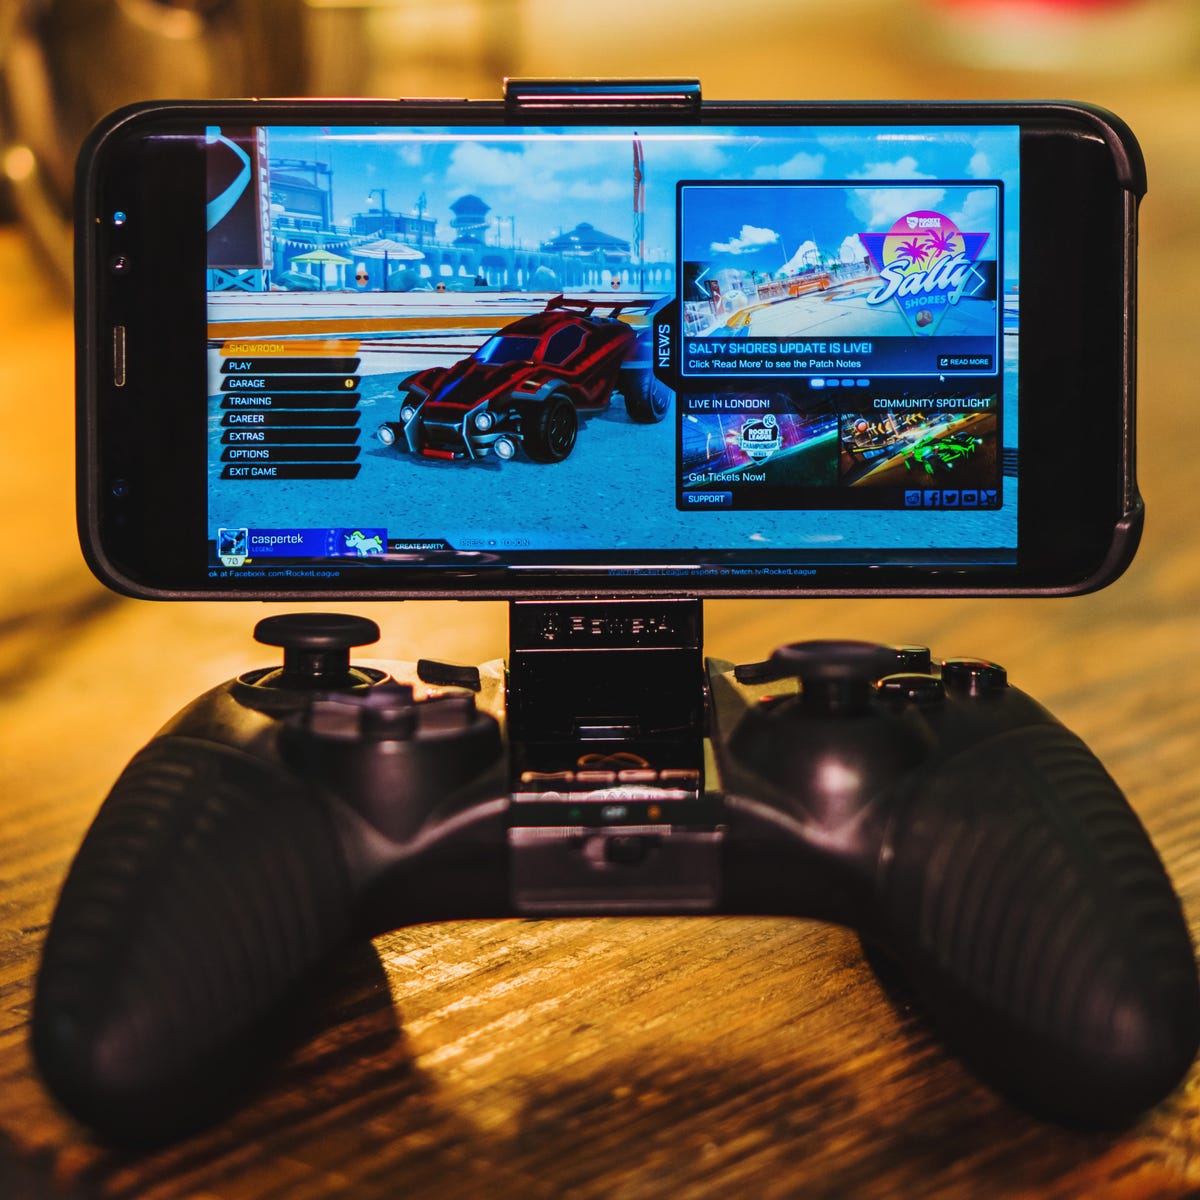 How To Play Steam Games On Your Phone 